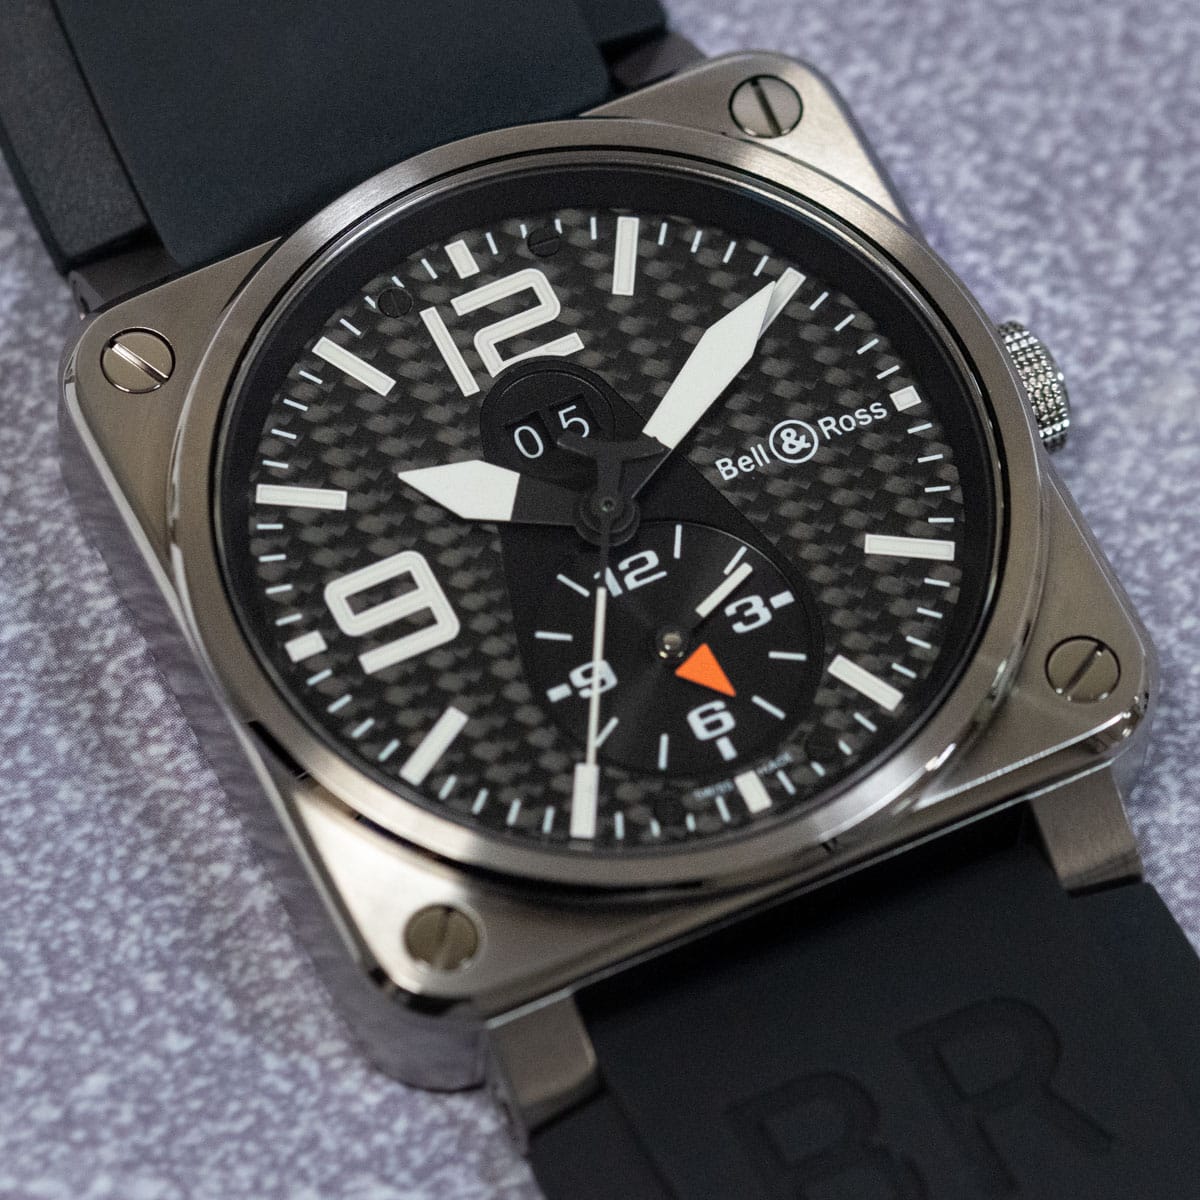 Extra Shot of BR 03-51 GMT Big Date